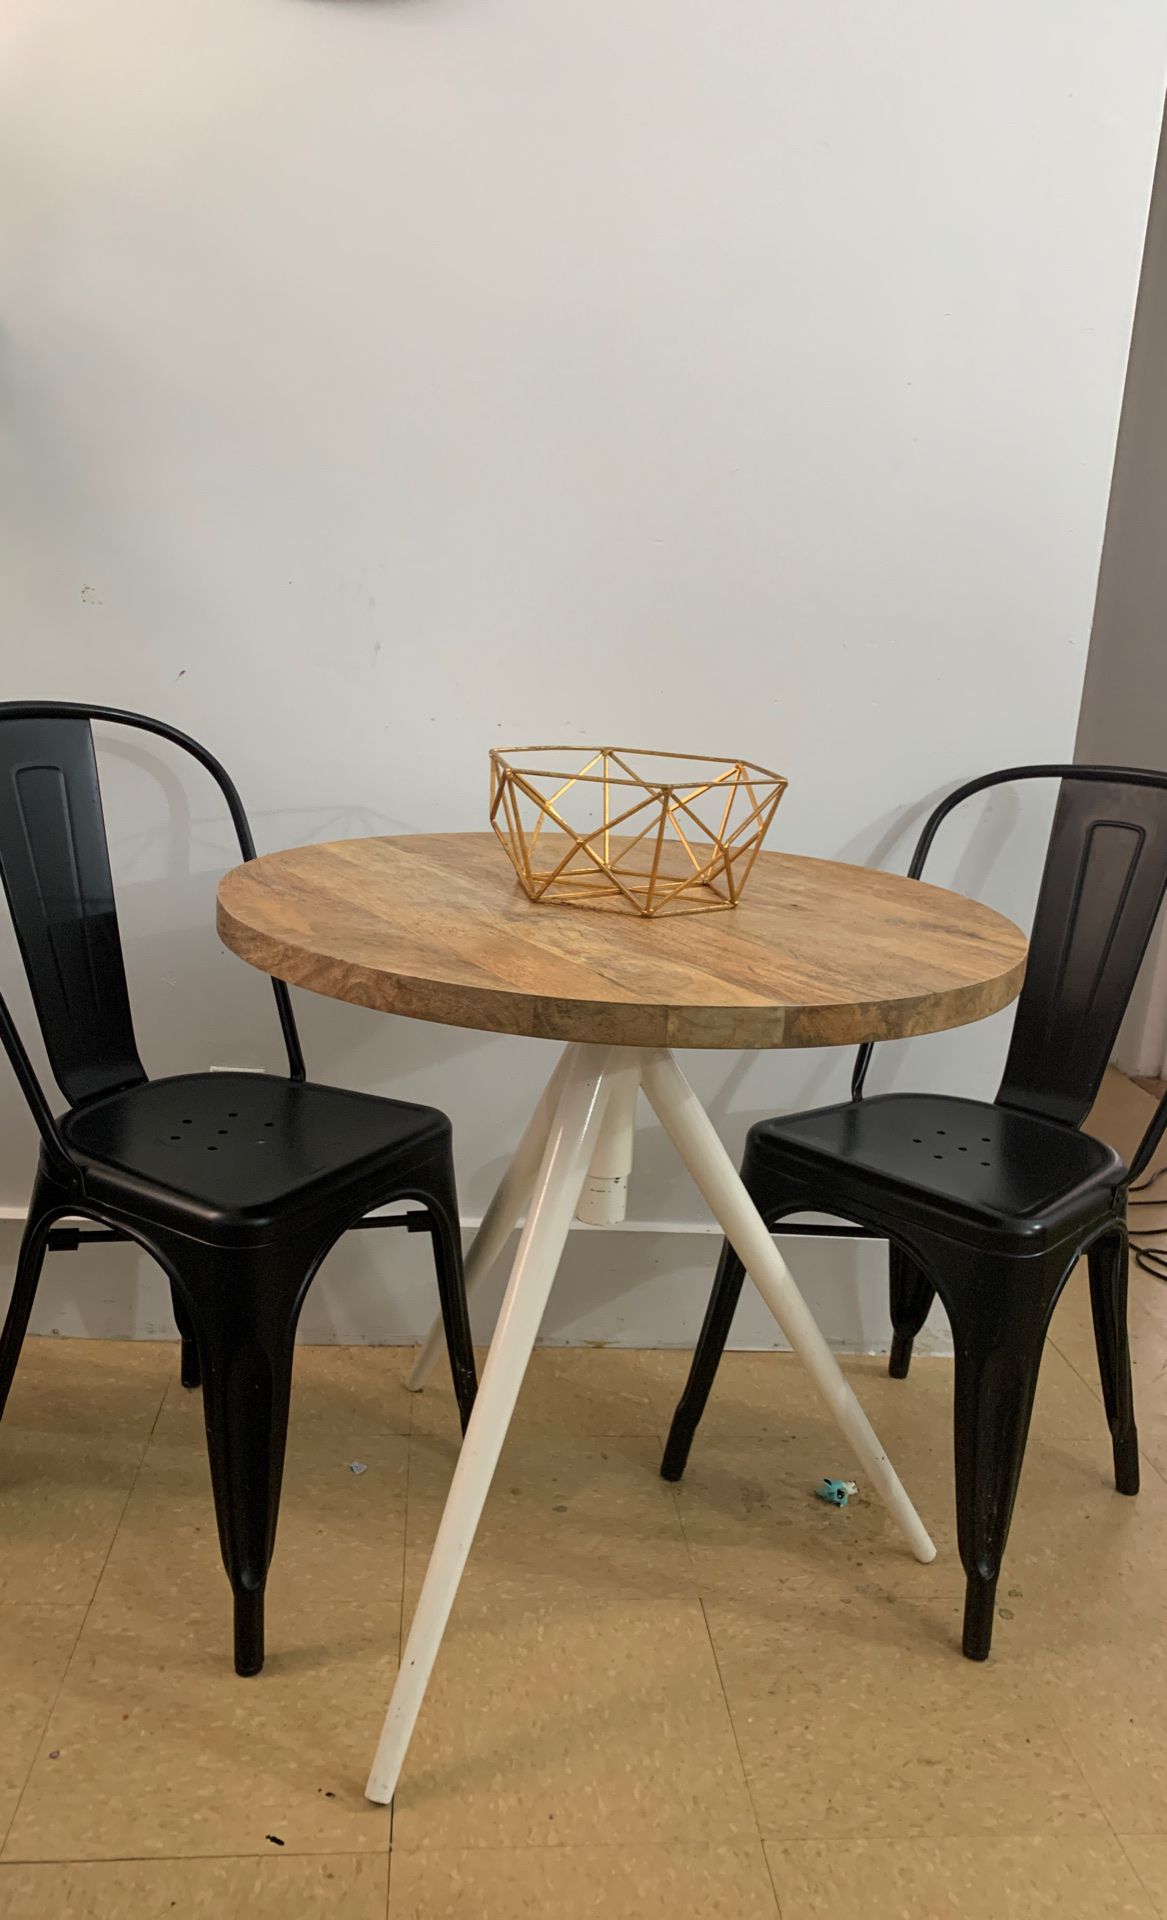 West Elm bistro table with 4 black mid century modern chairs